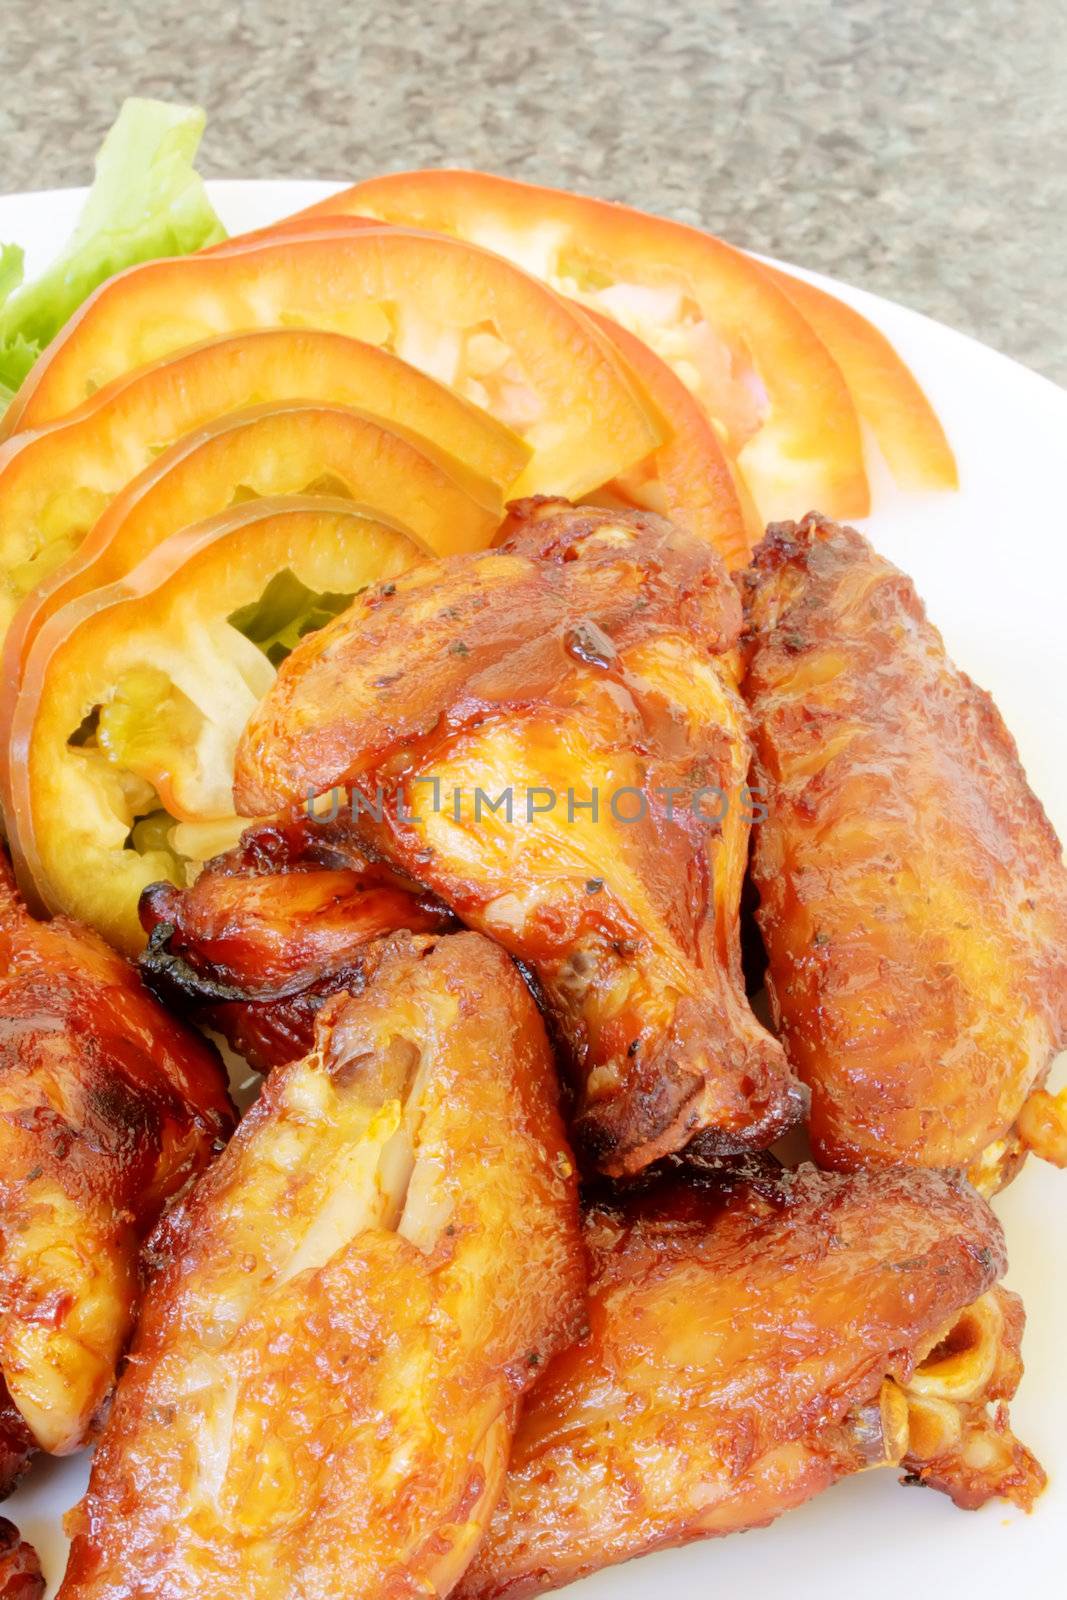 Spicy Buffalo Wings Barbecued on a Plate